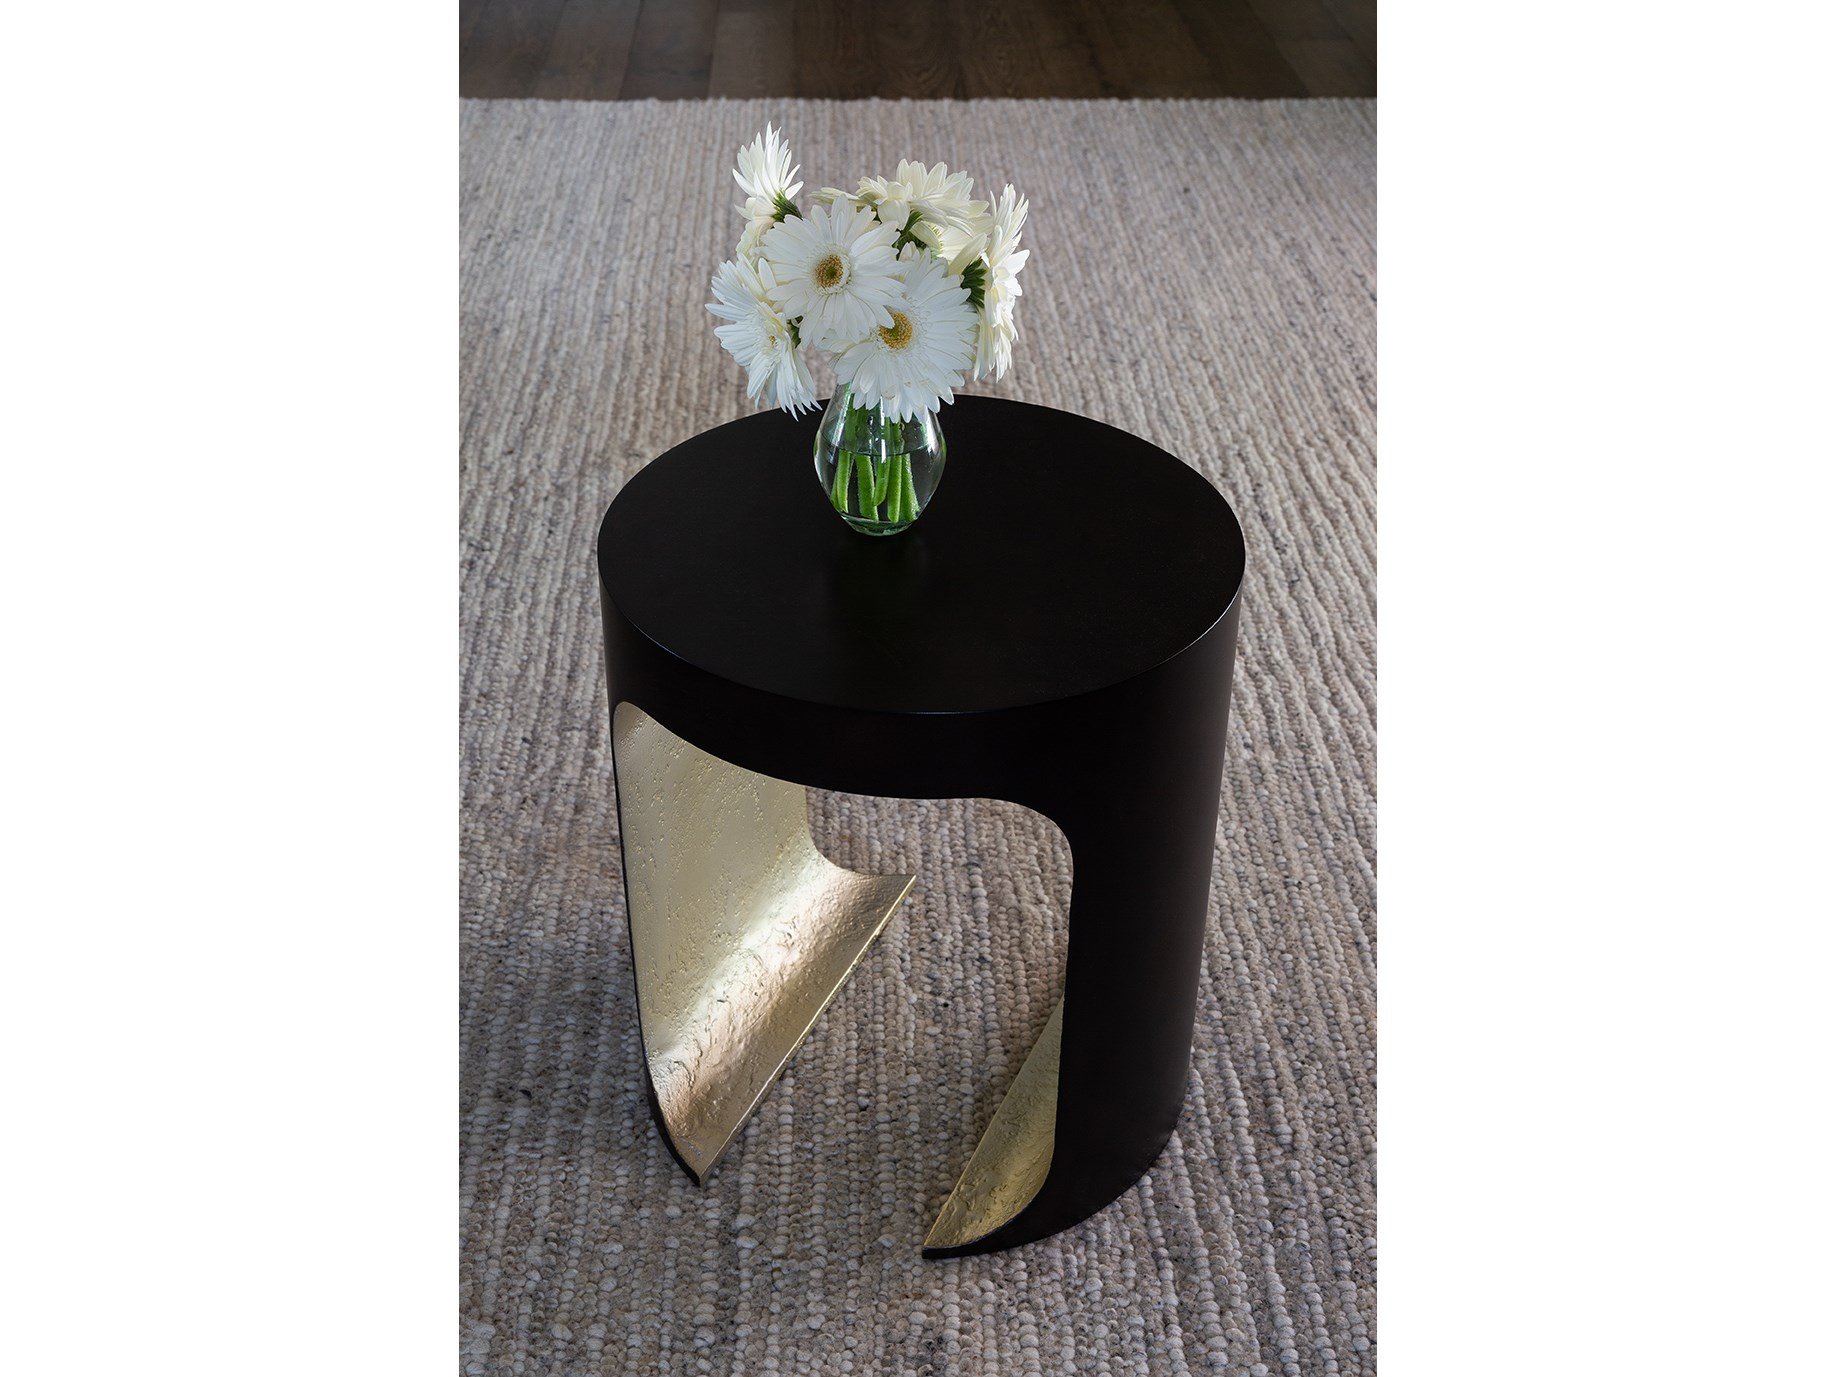 Sonora Side Table